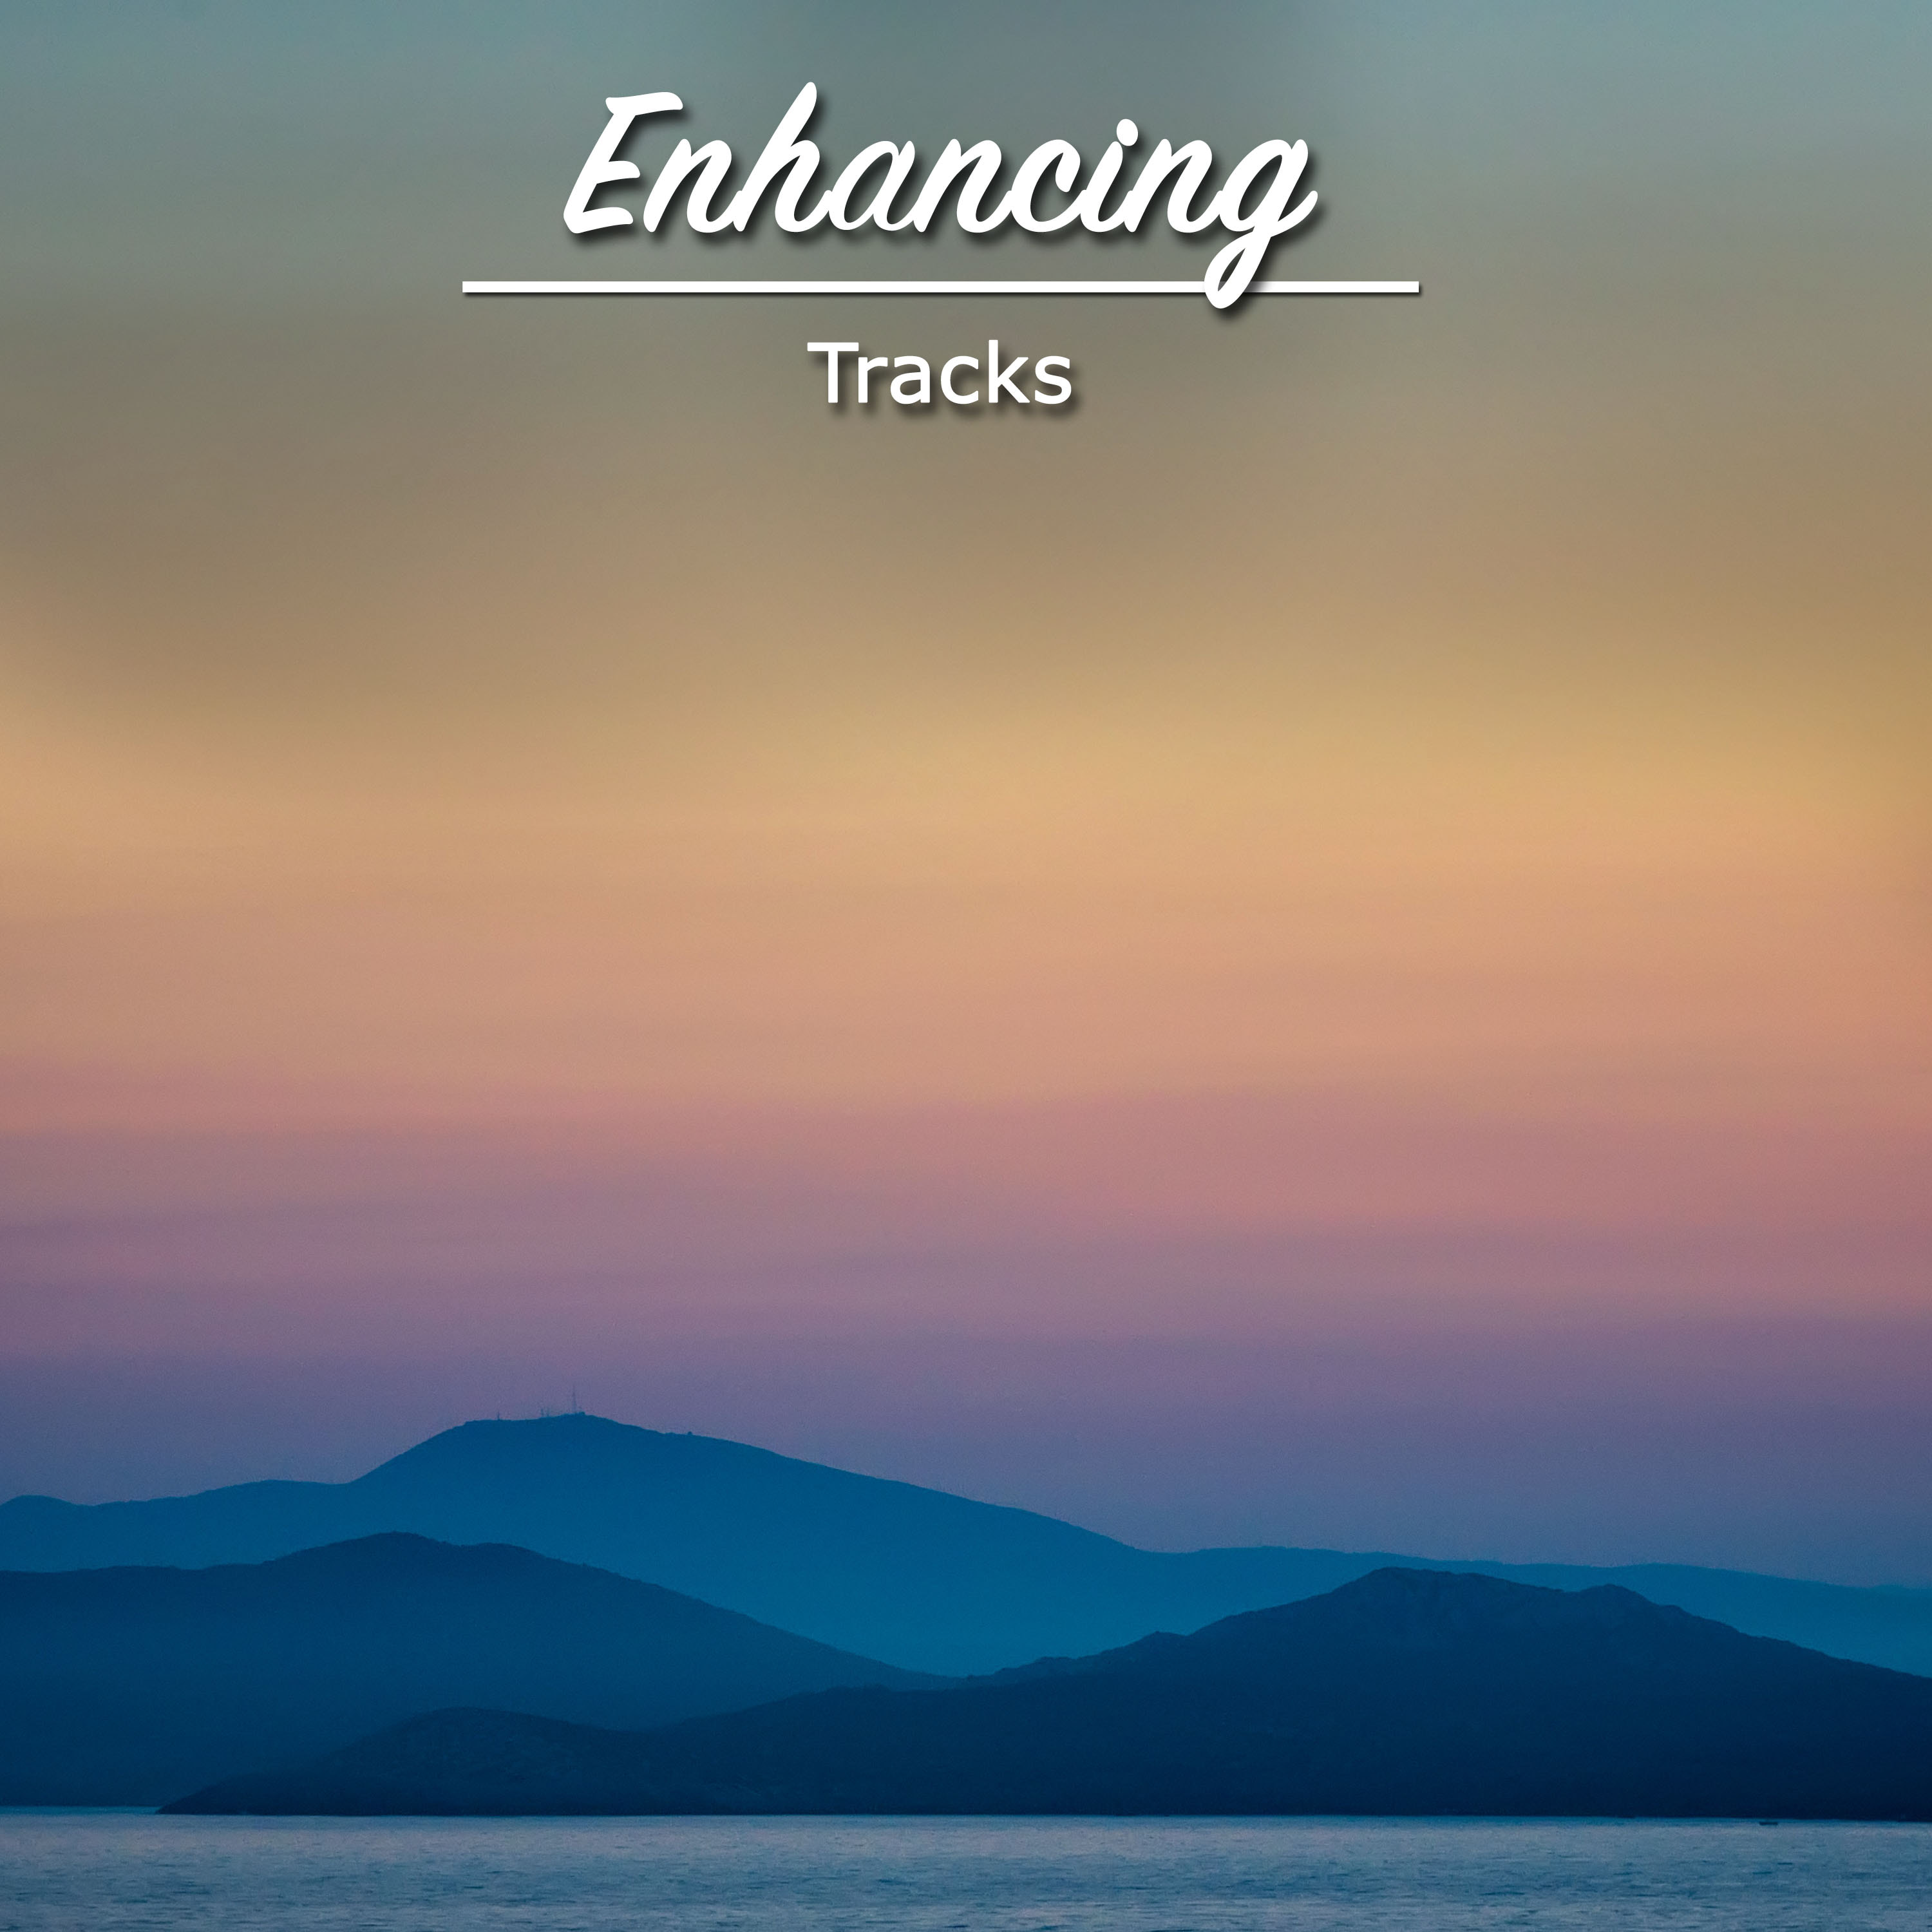 #16 Enhancing Tracks for Meditation, Spa and Relaxation